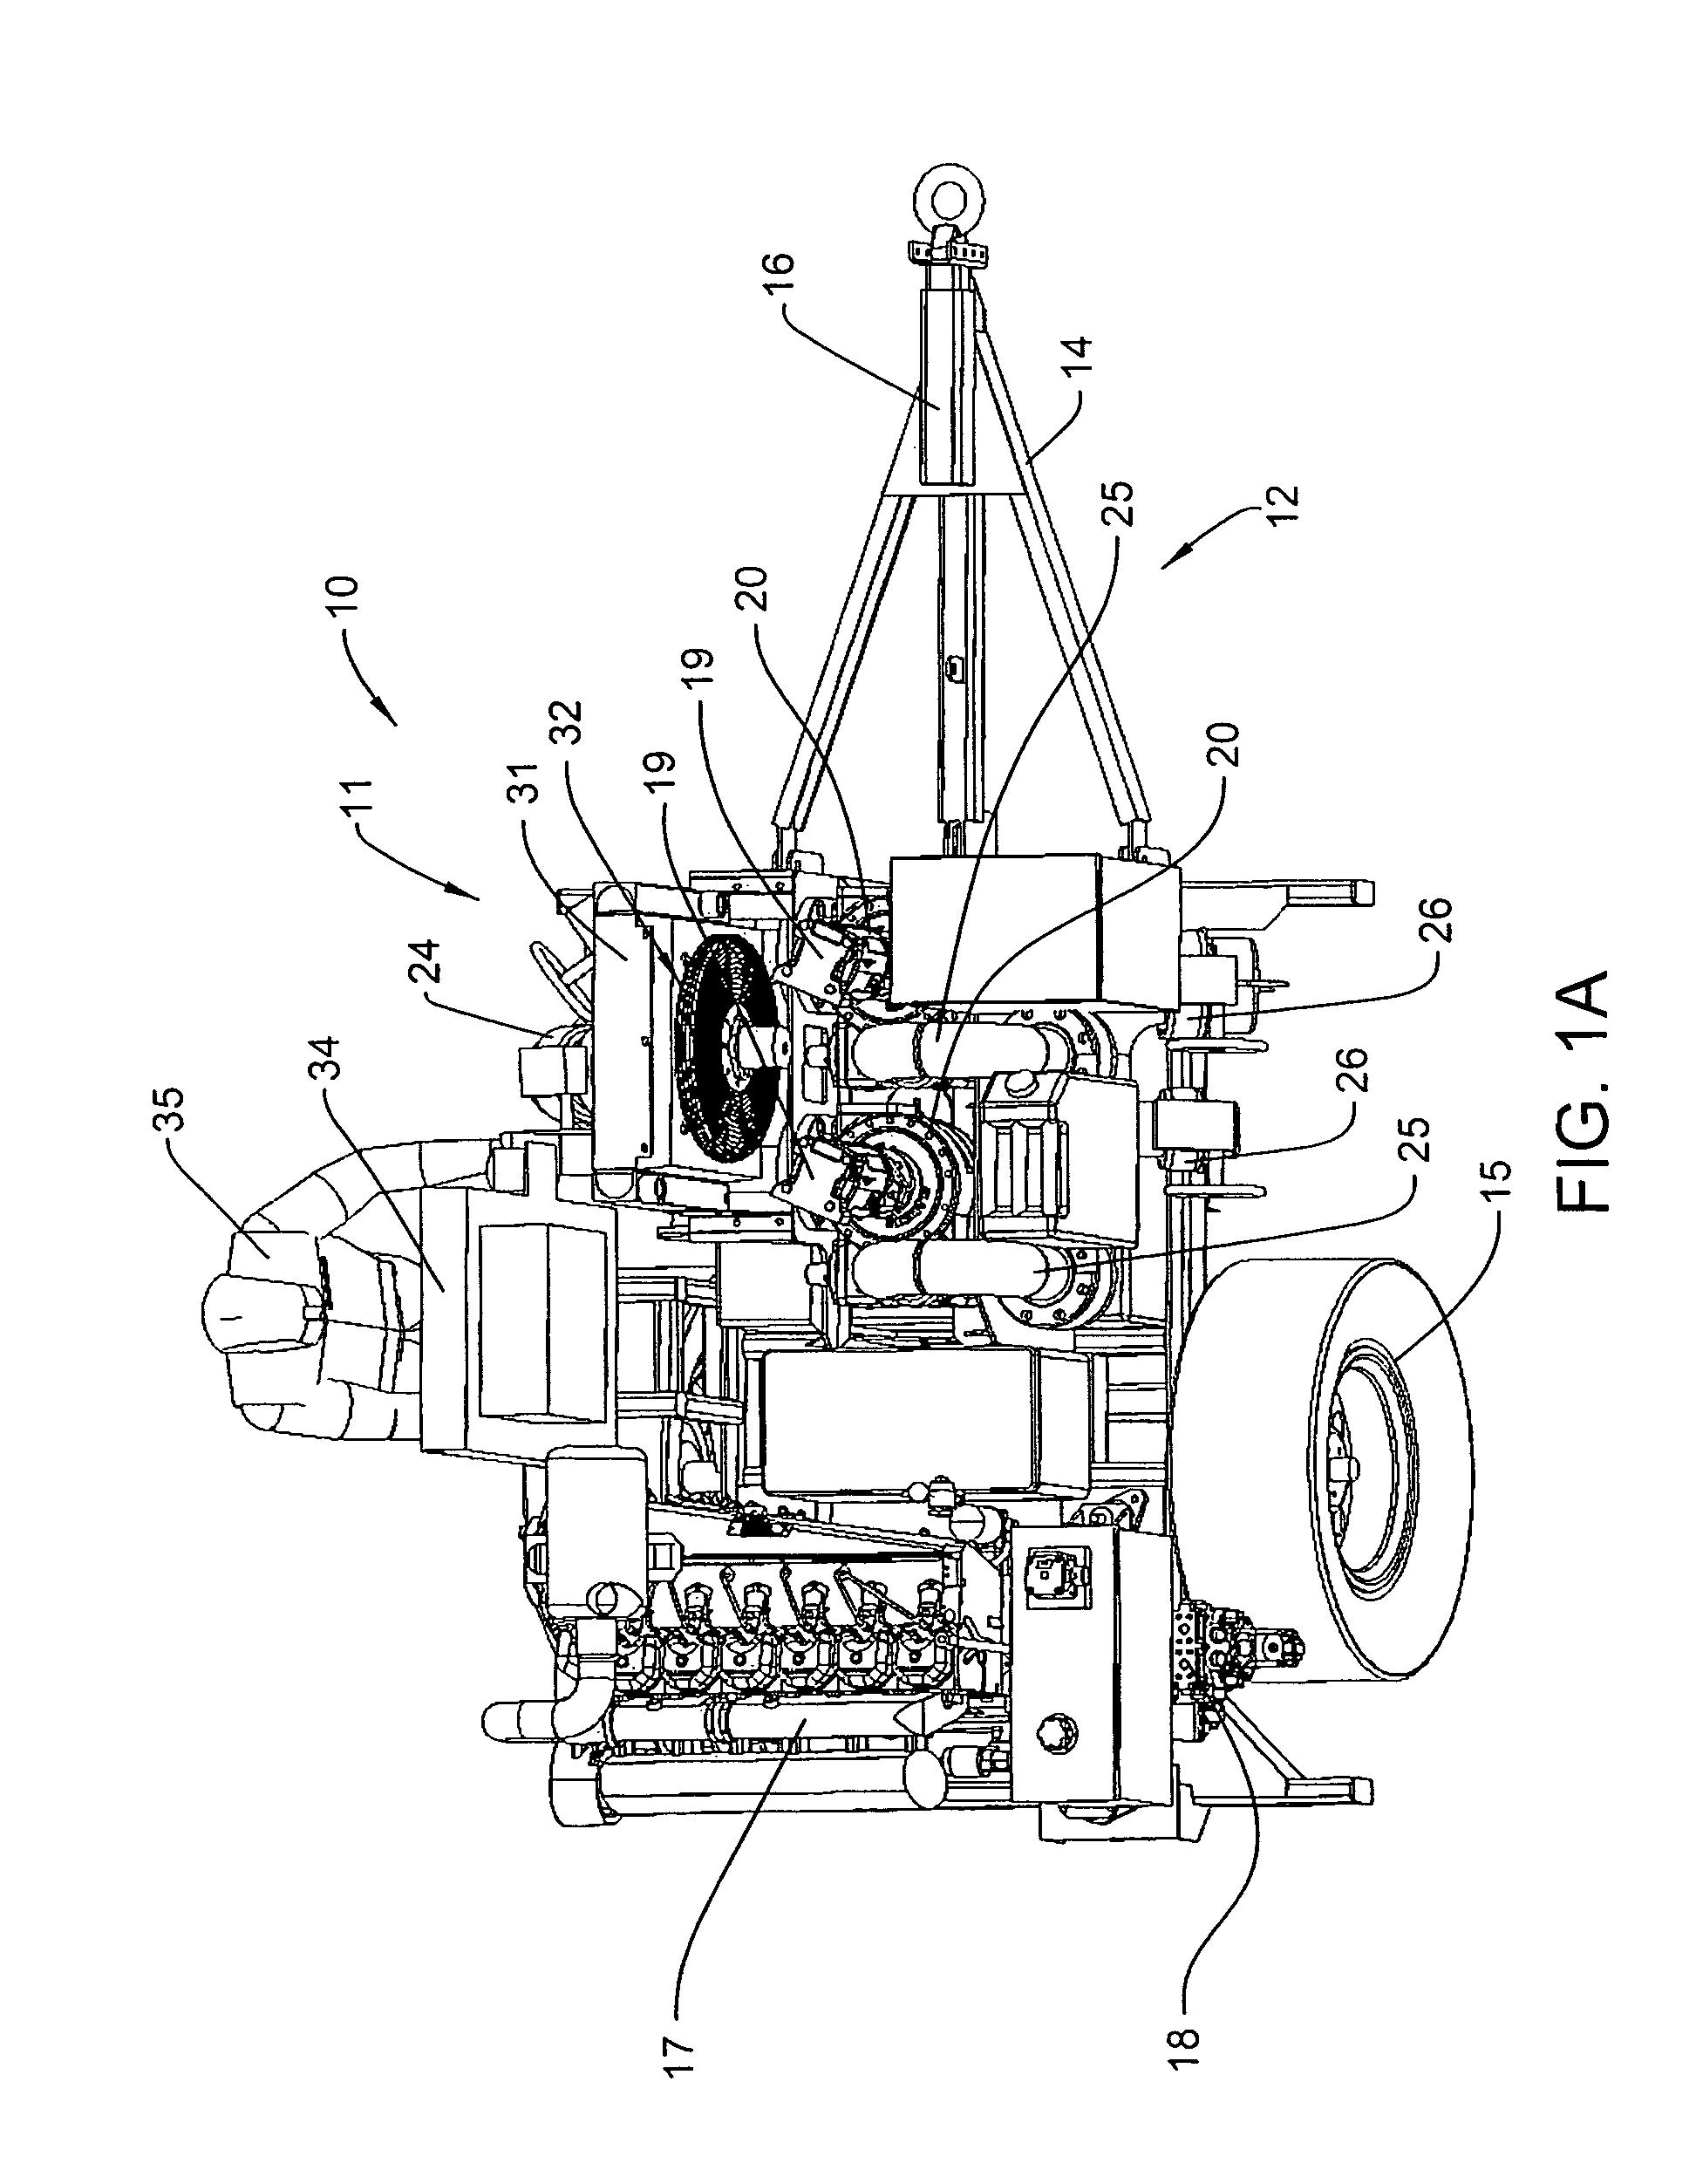 Hydraulic drive and control system for pumps using a charge pump